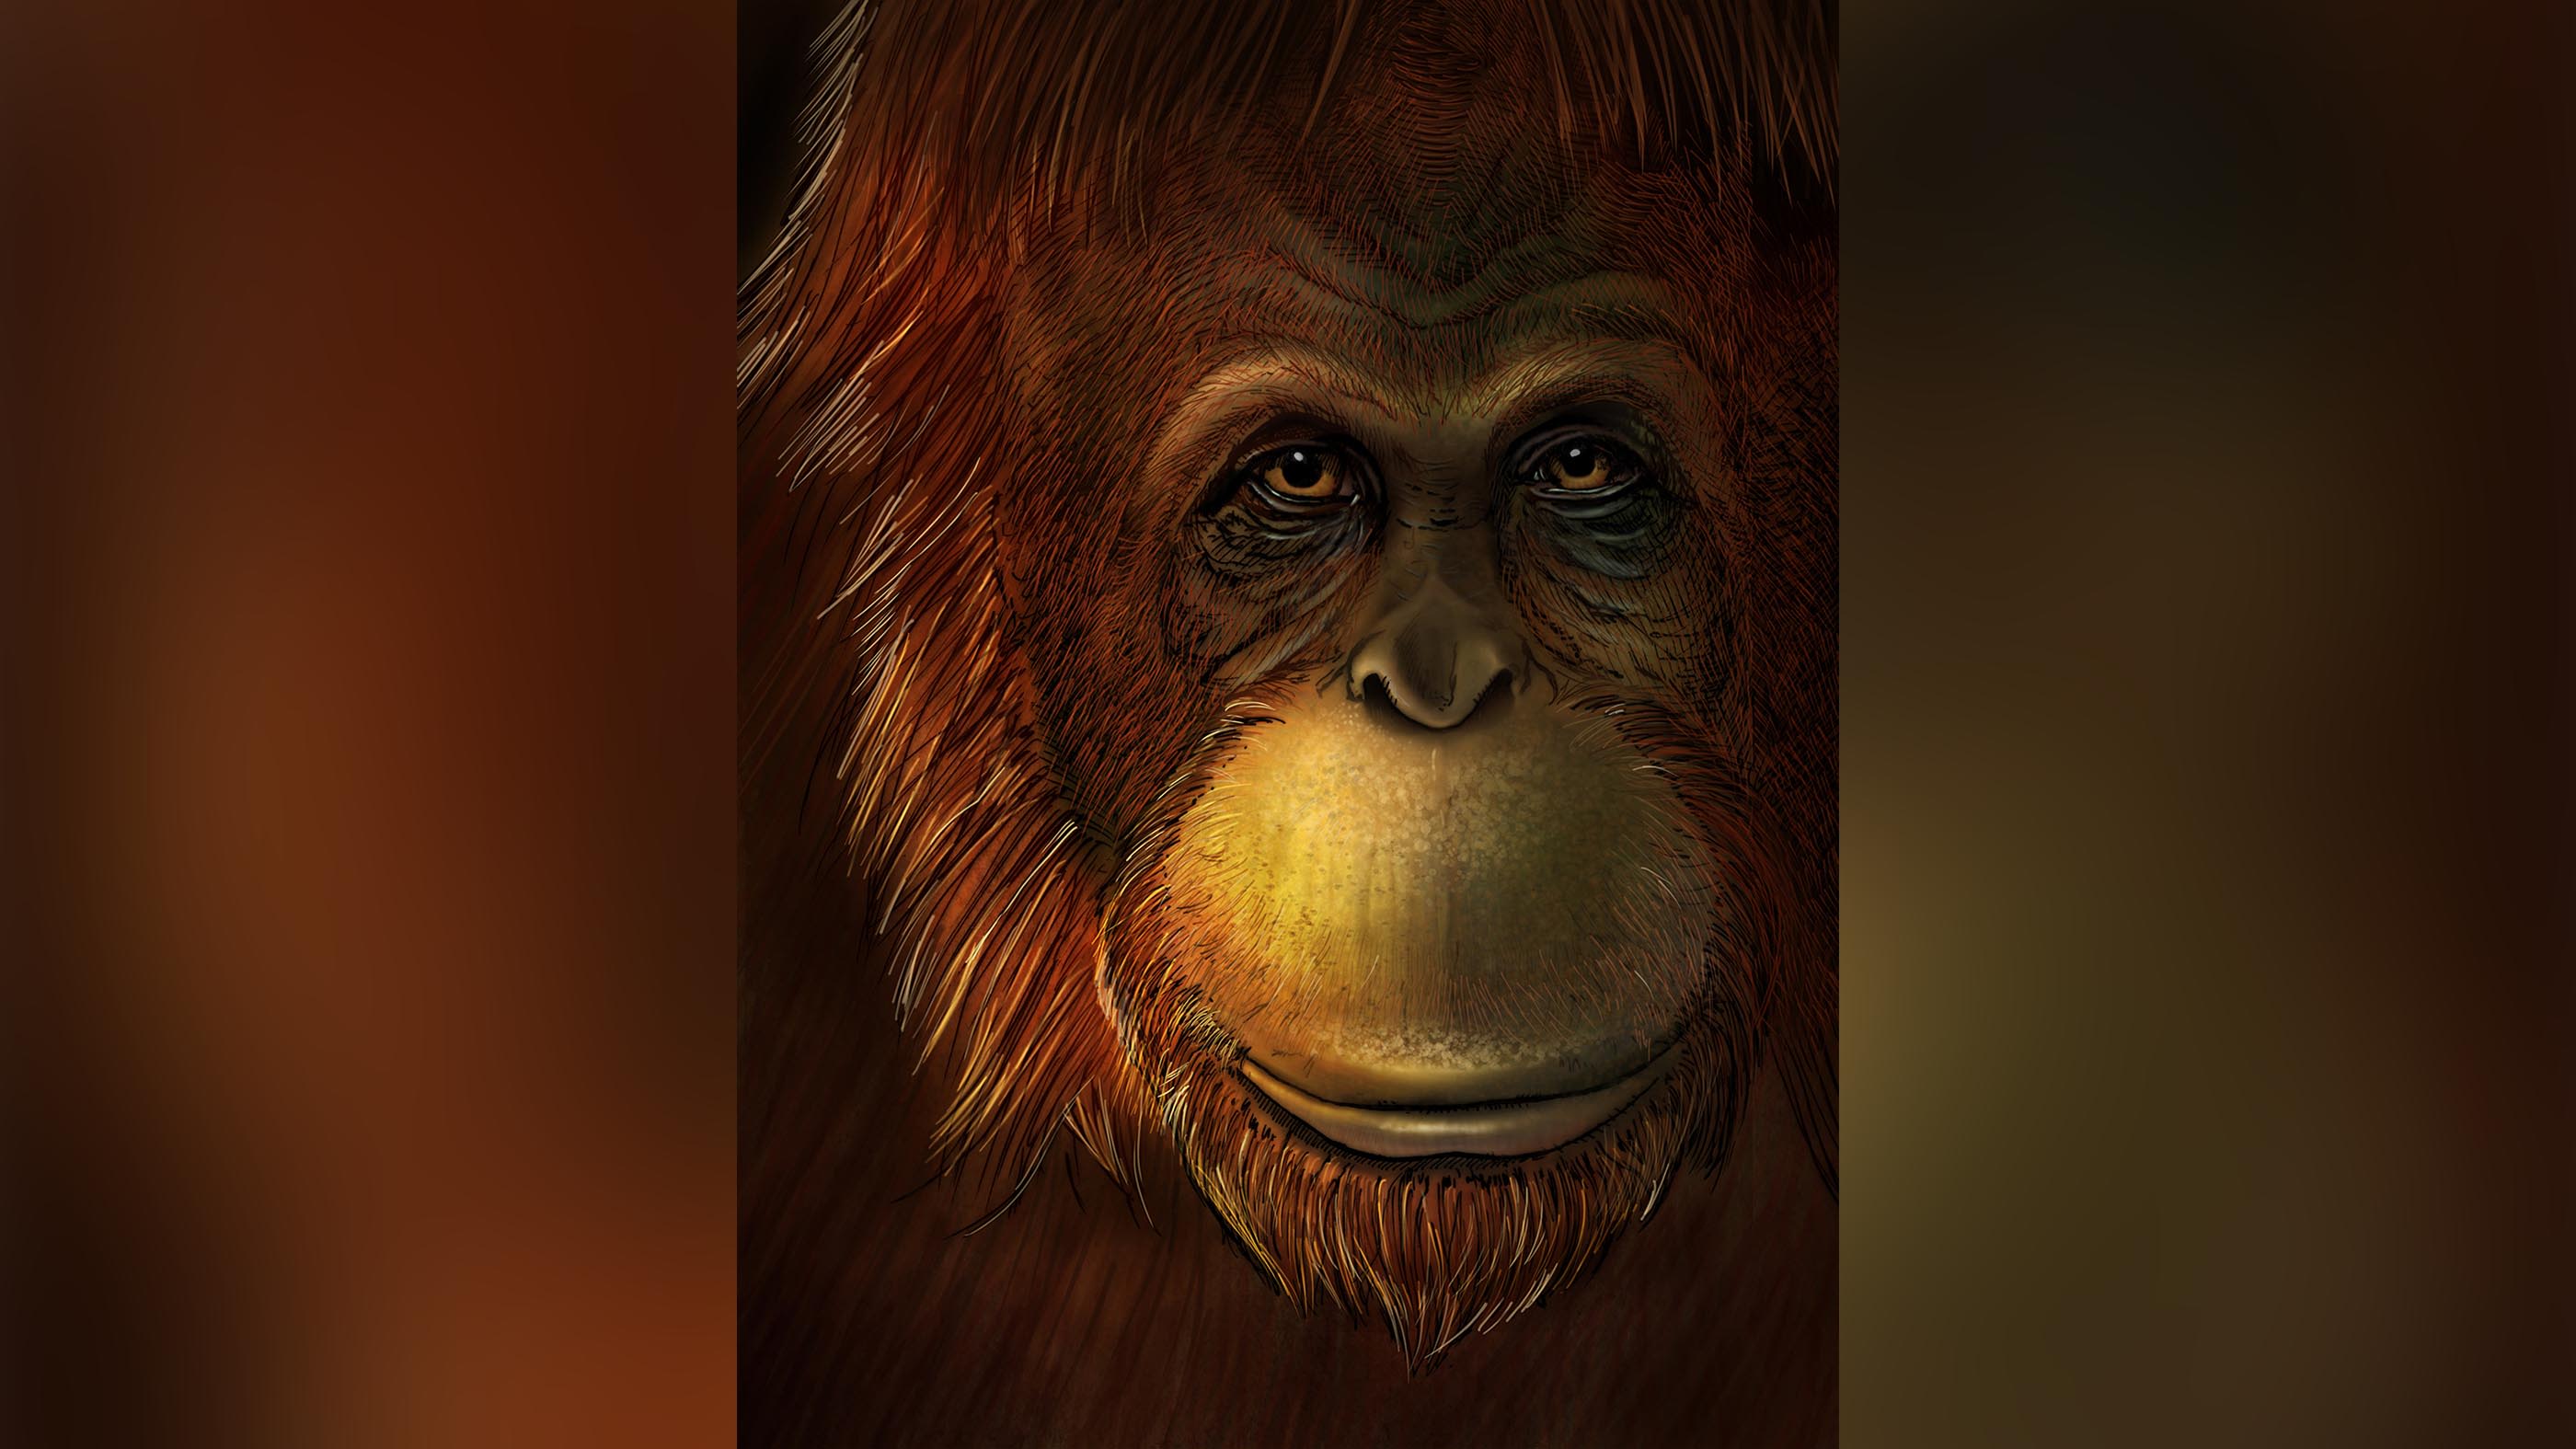 Real King Kong' primate was related to the orangutan